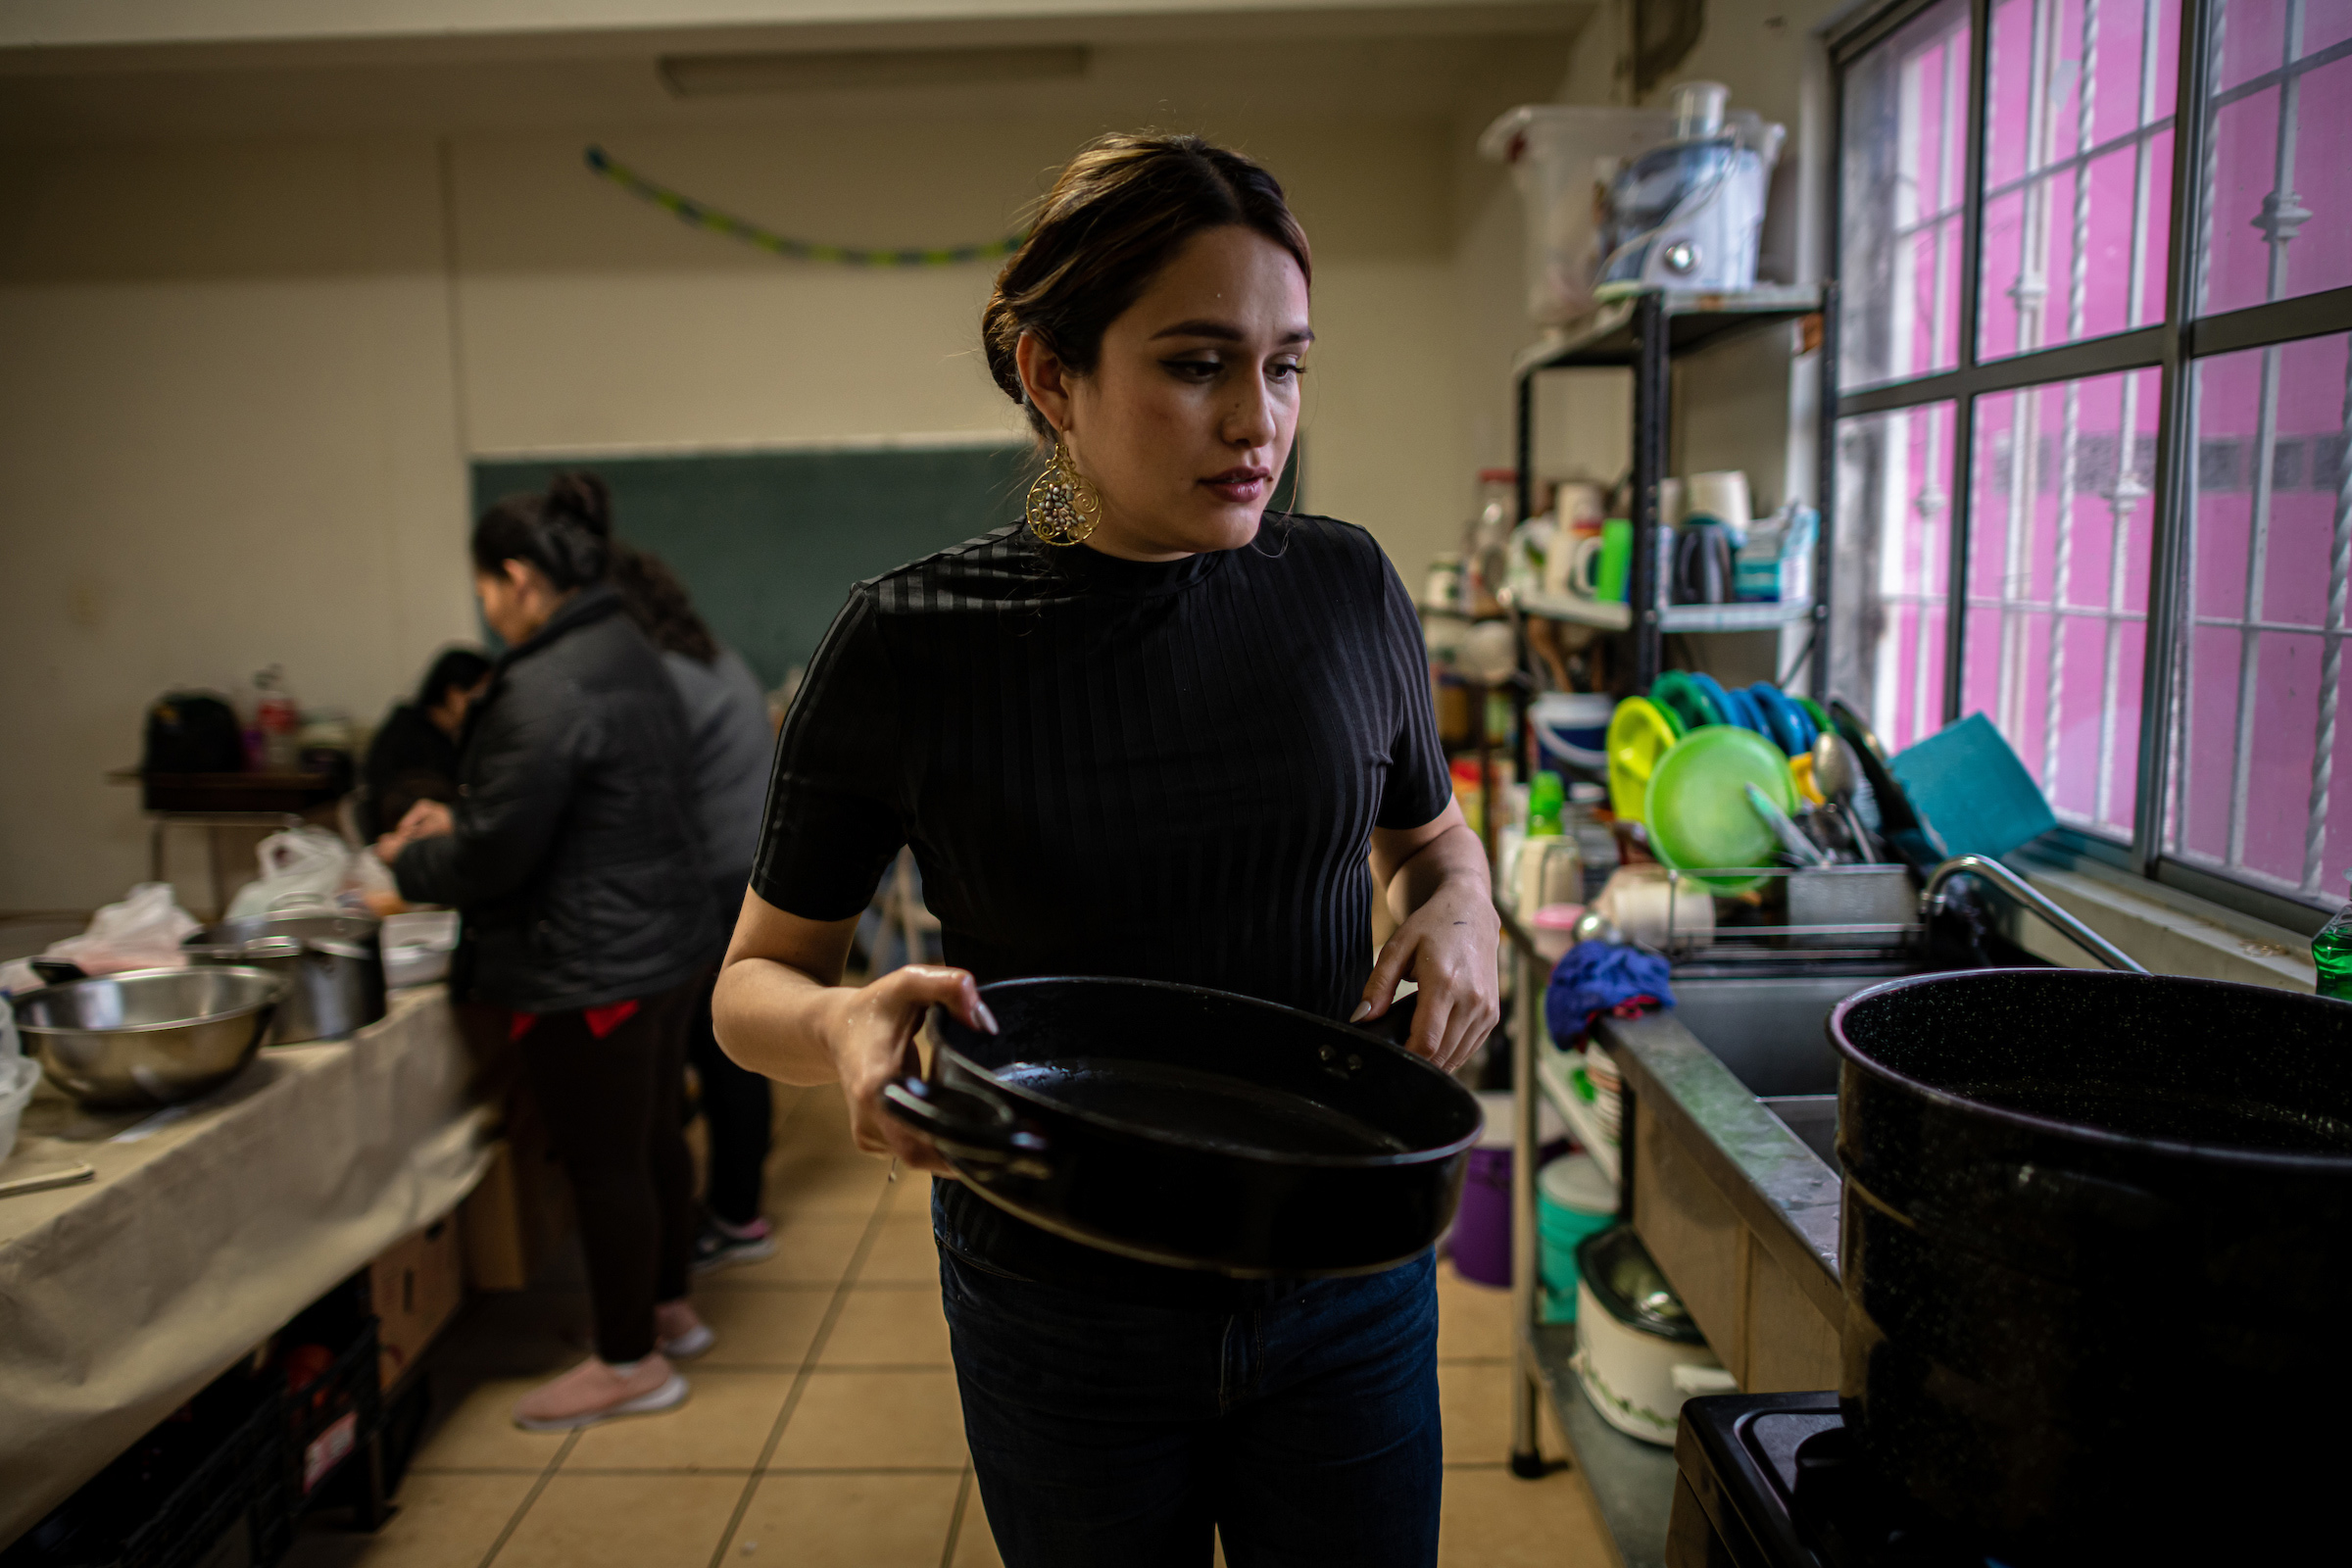 Shelter coordinator Karina Breceda cooks soup with migrant women in the kitchen. “When I see my team, they’re basically on call 24/7,” Breceda says. “There’s a lot of peace, and a lot of healing with the work that they’re doing.